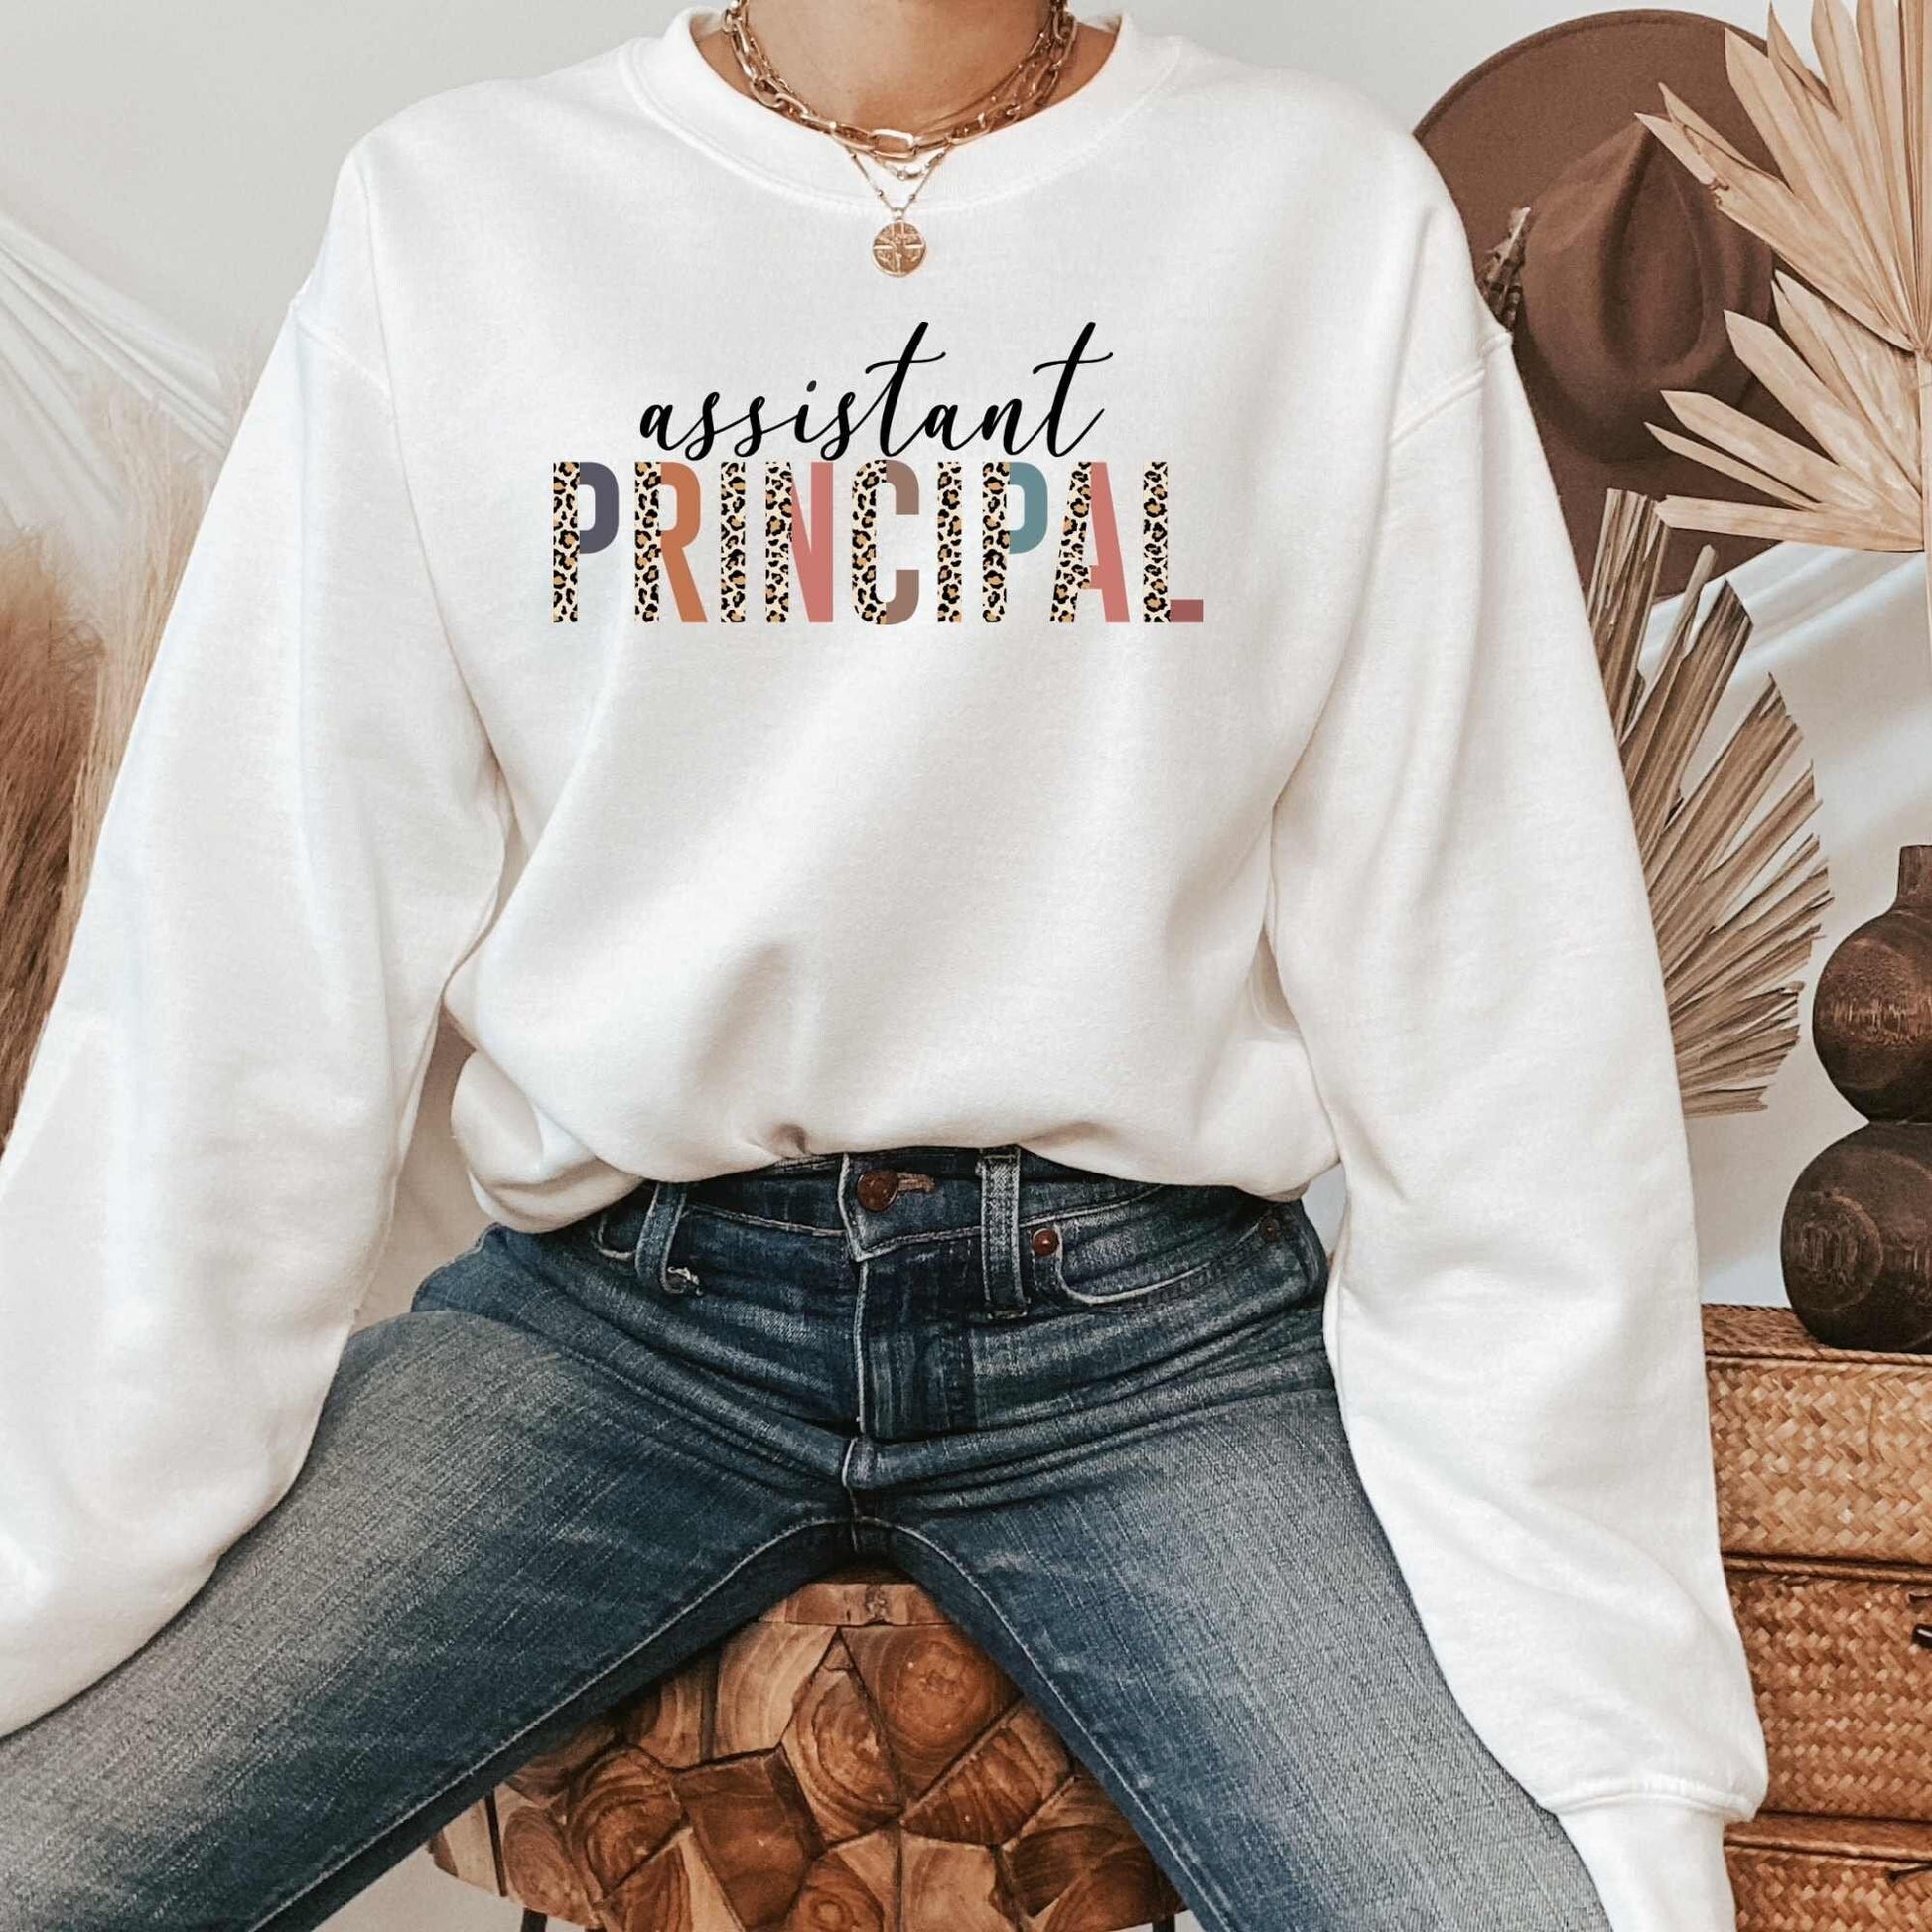 Assistant Principal Shirt | New Administration, Elementary, Middle, High School Teams, Appreciation Gifts, 100th Day of School Celebration HMDesignStudioUS